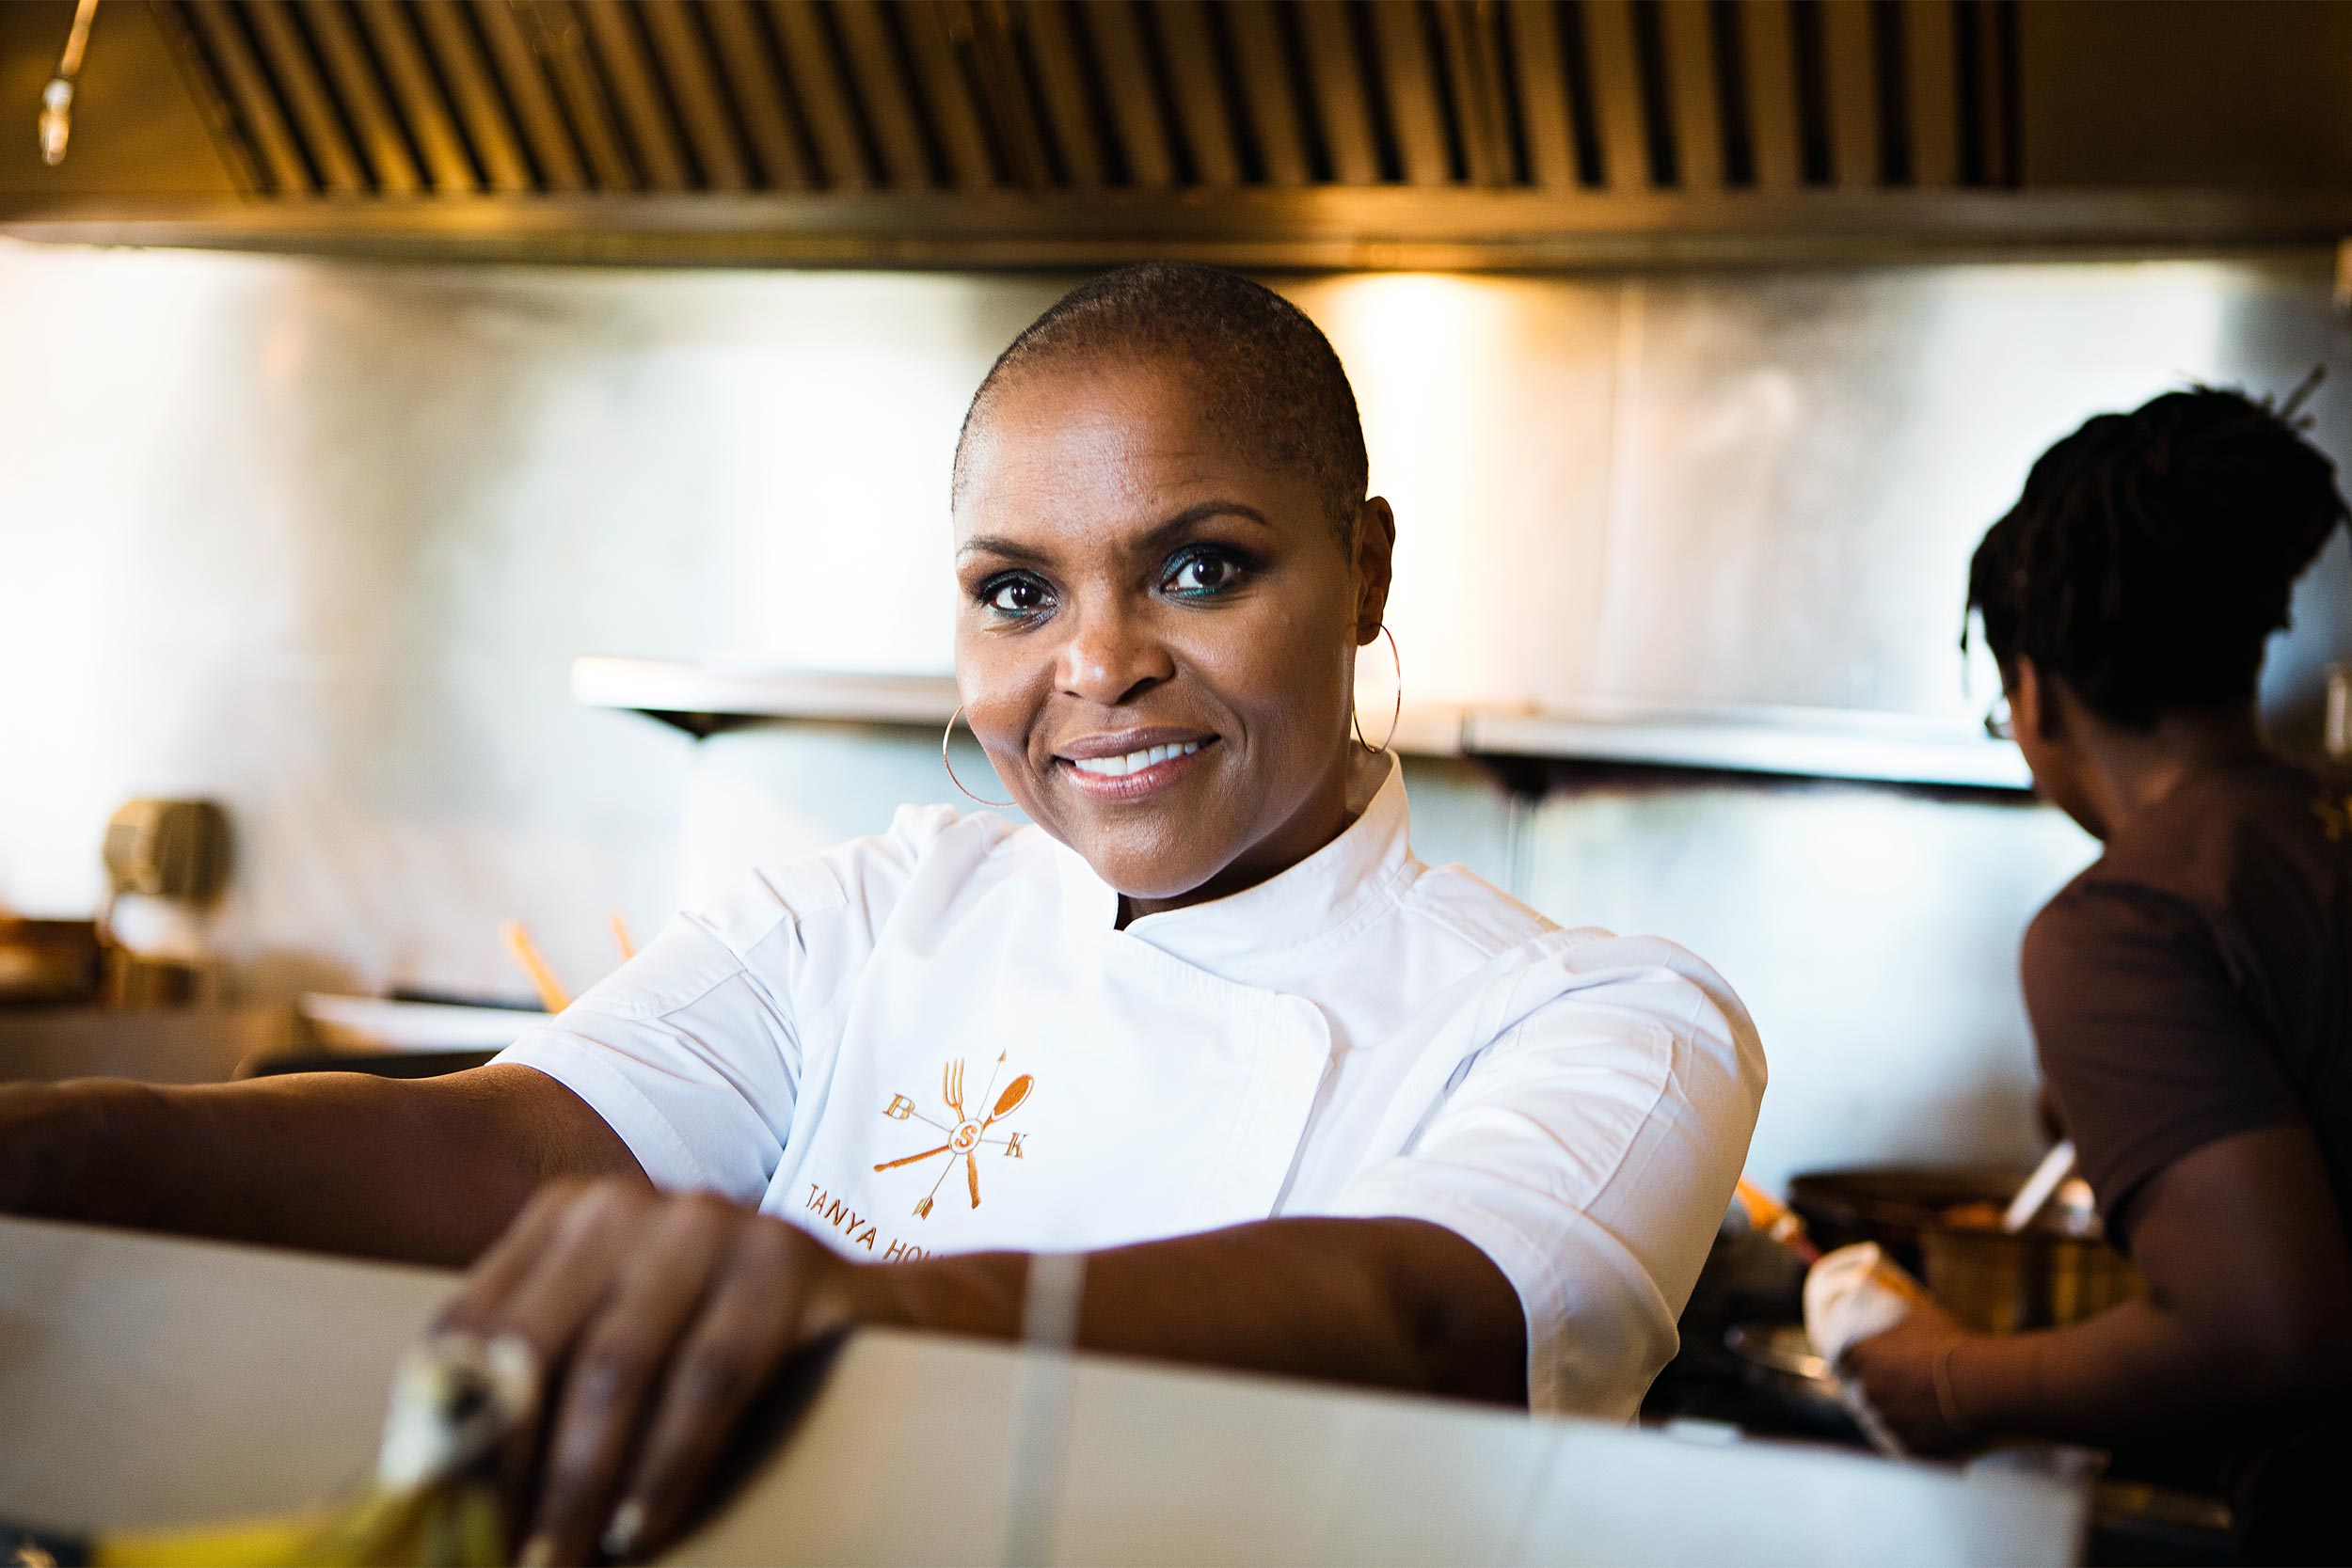 Tanya Holland is an award-winning chef, author and restauranteur who has appeared on Bravo TV’s “Top Chef” and hosted her own show, “Tanya’s Kitchen Table,” on Oprah Winfrey’s network. (Photos contributed by Tanya Holland)